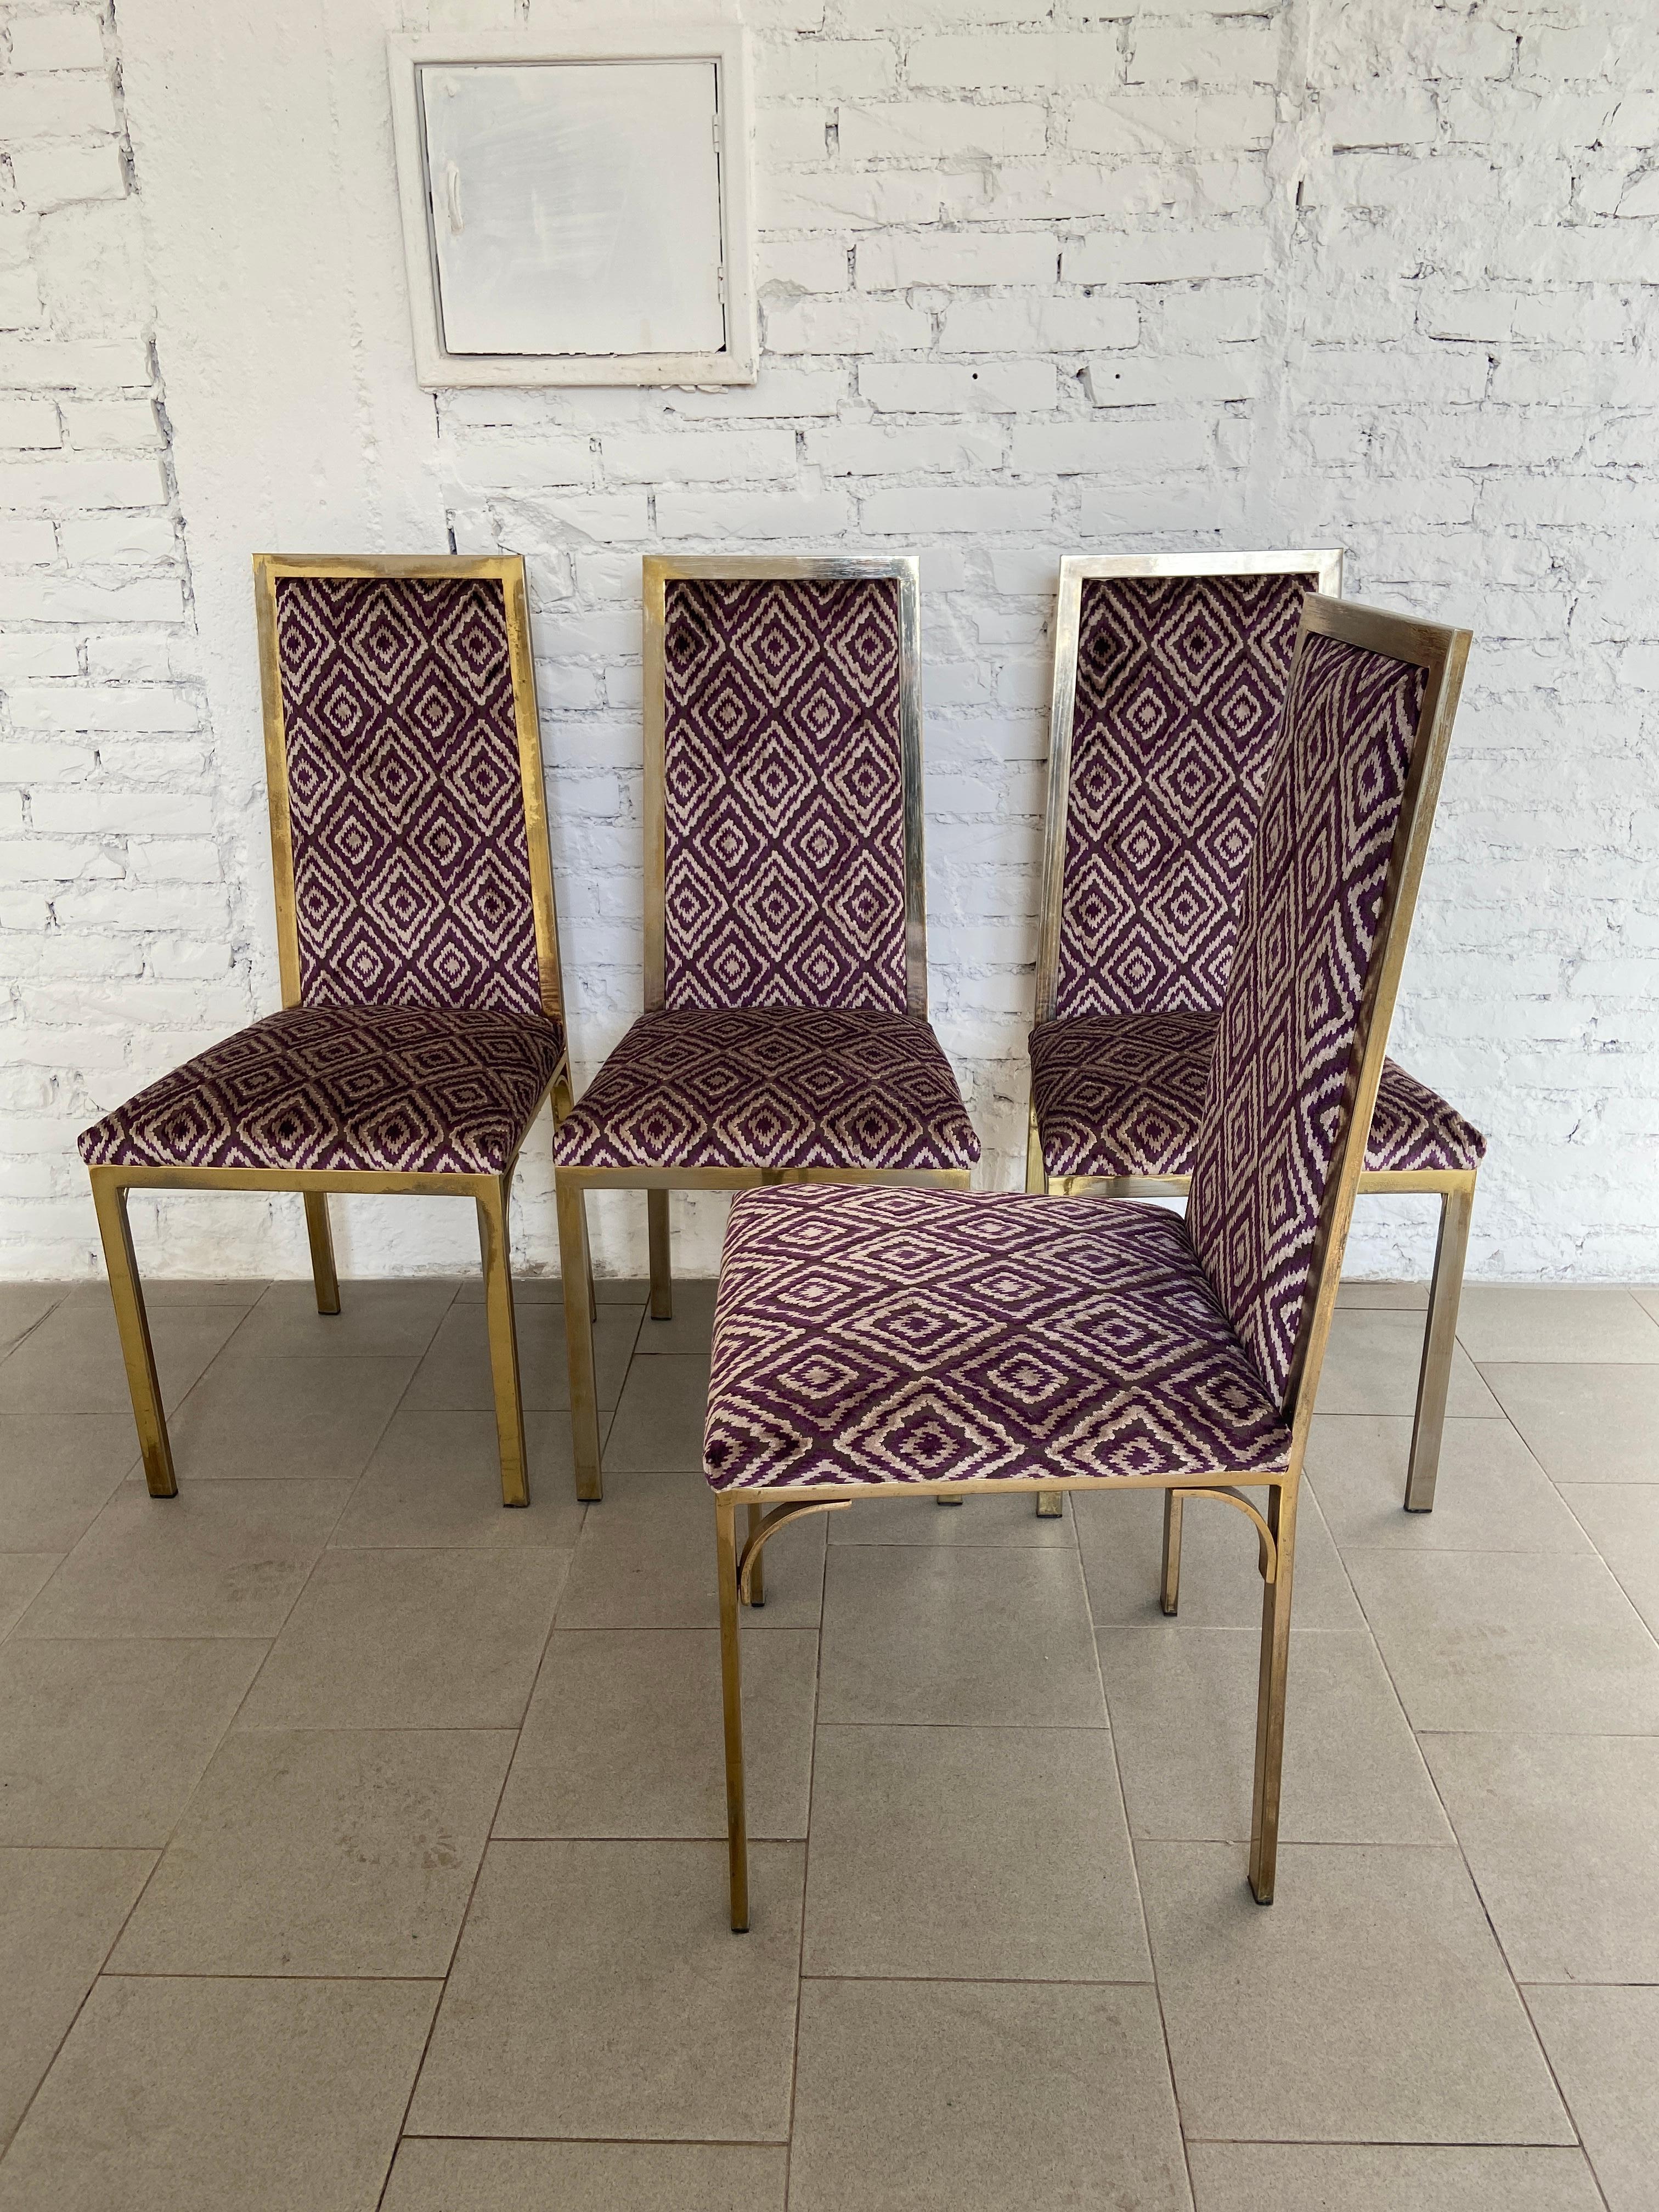 Late 20th Century Mid-Century Modern French Set of 4 Gilt Metal Chairs with Velvet Upholstery